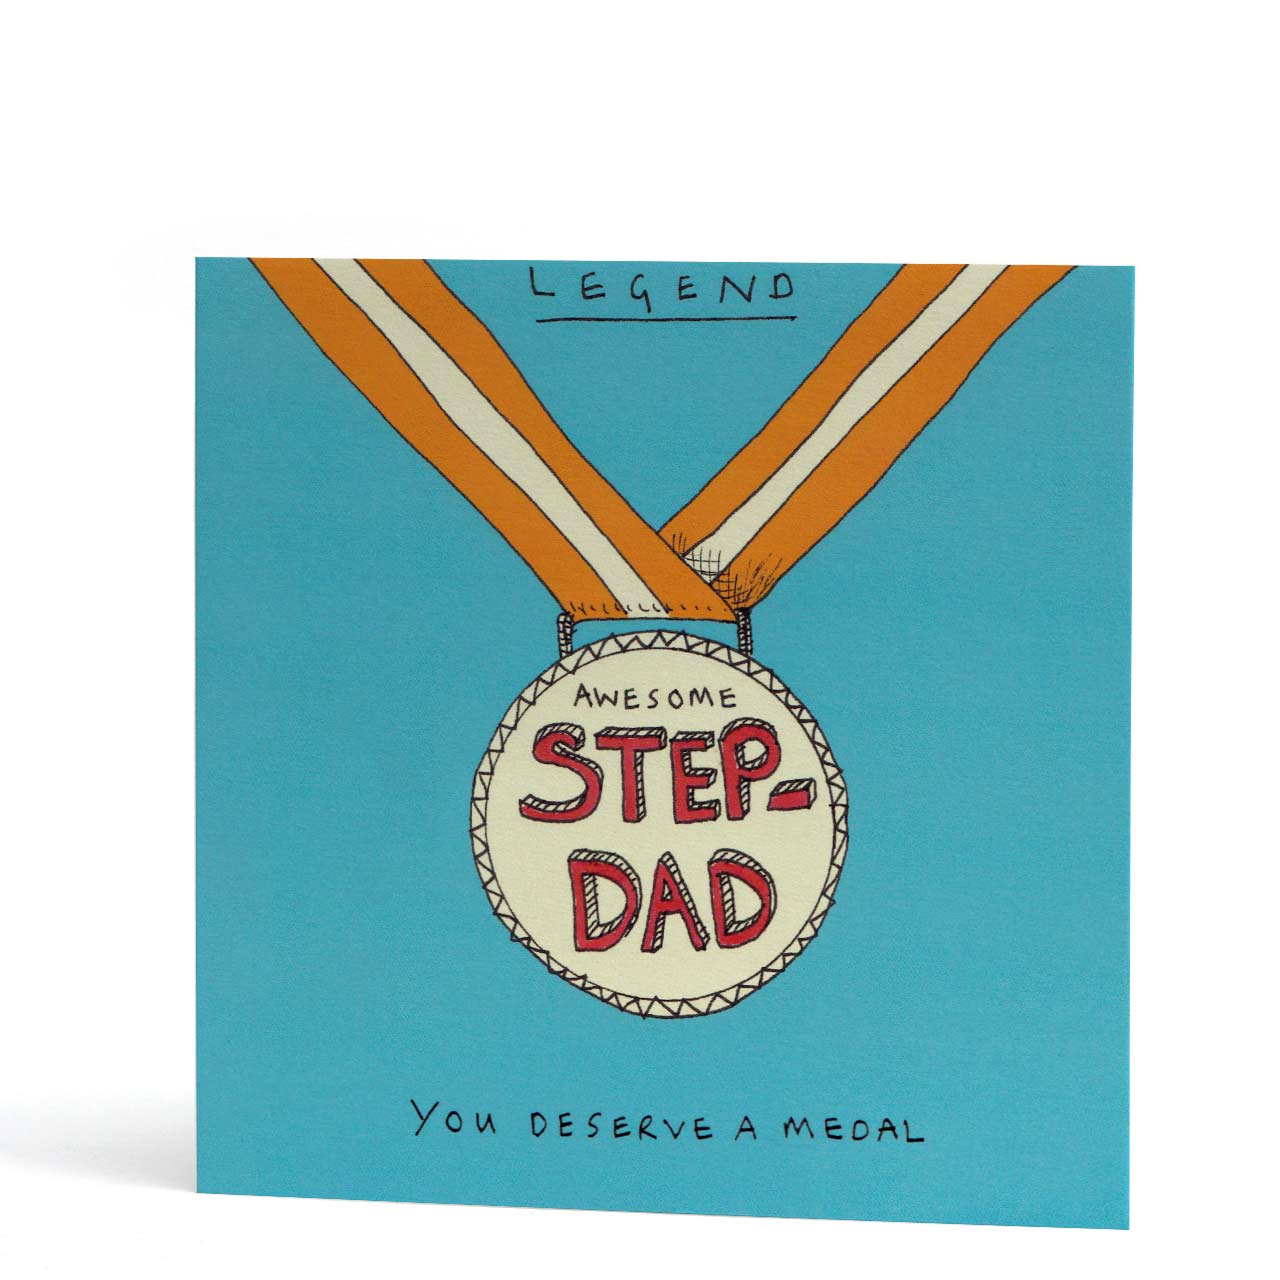 Awesome Step Dad Medal Greeting Card